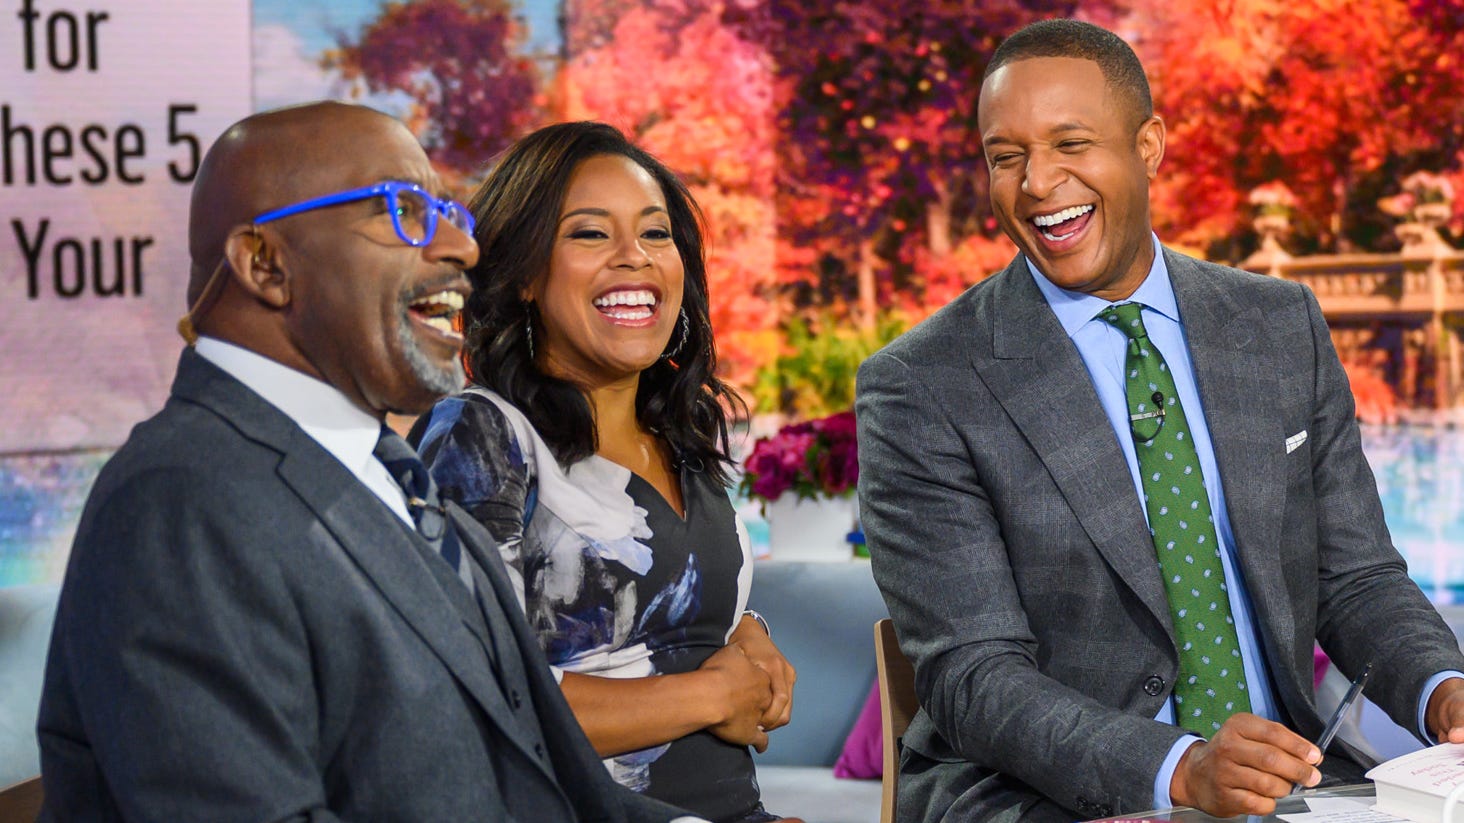 NBC'S 'Today' show coming to Nashville for live broadcast